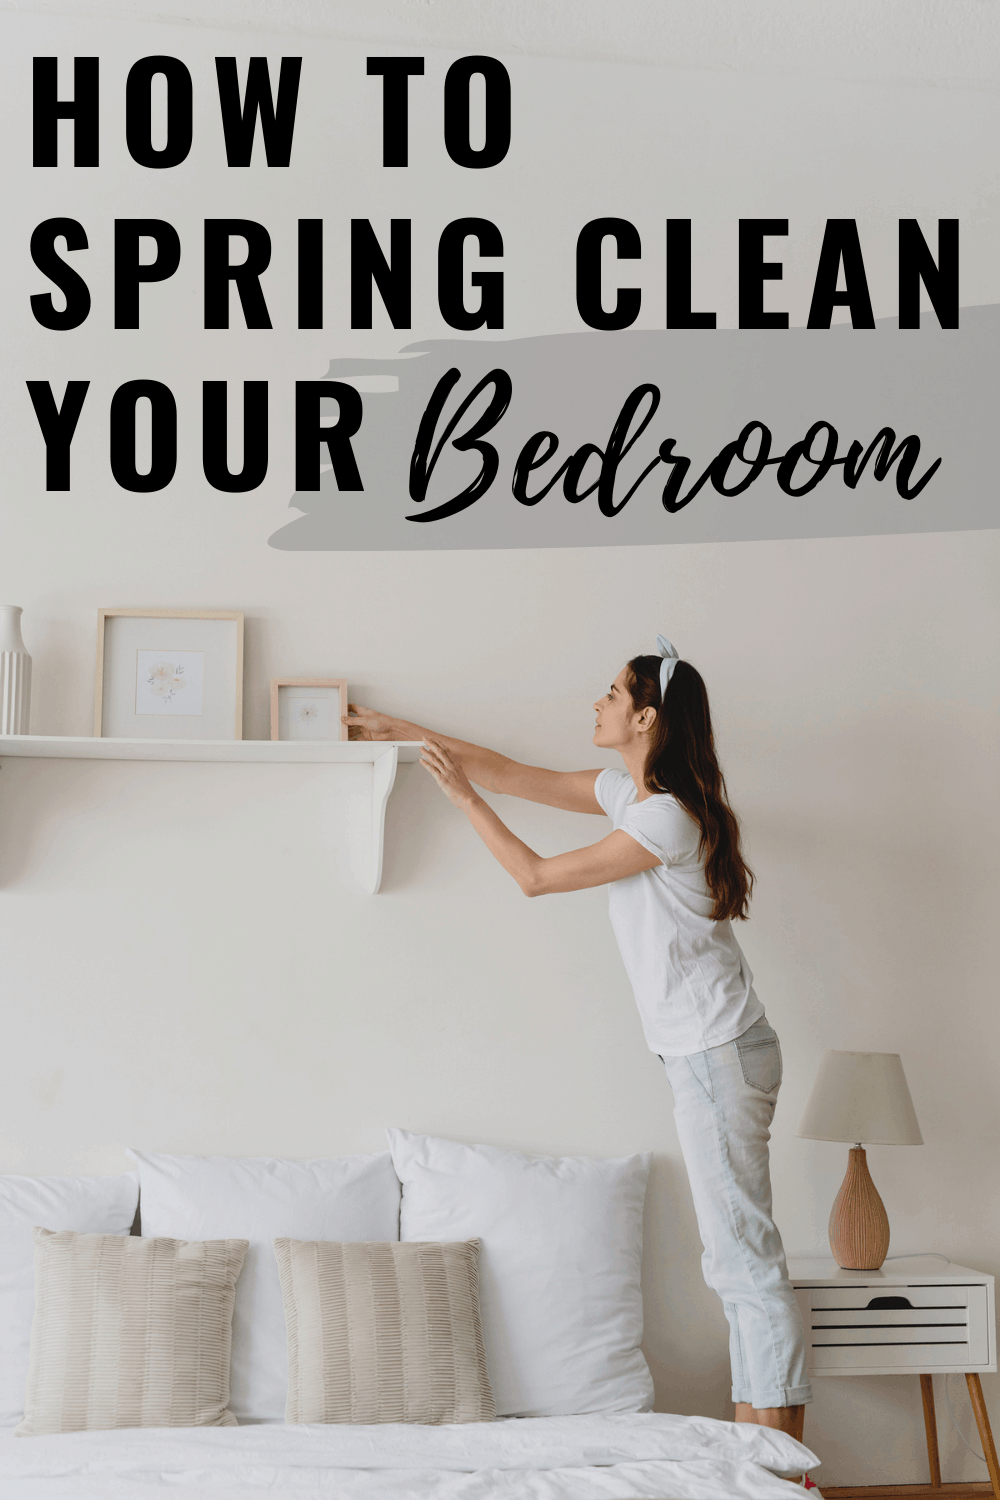 How to Deep Clean Your Bedroom in 7 Simple Steps